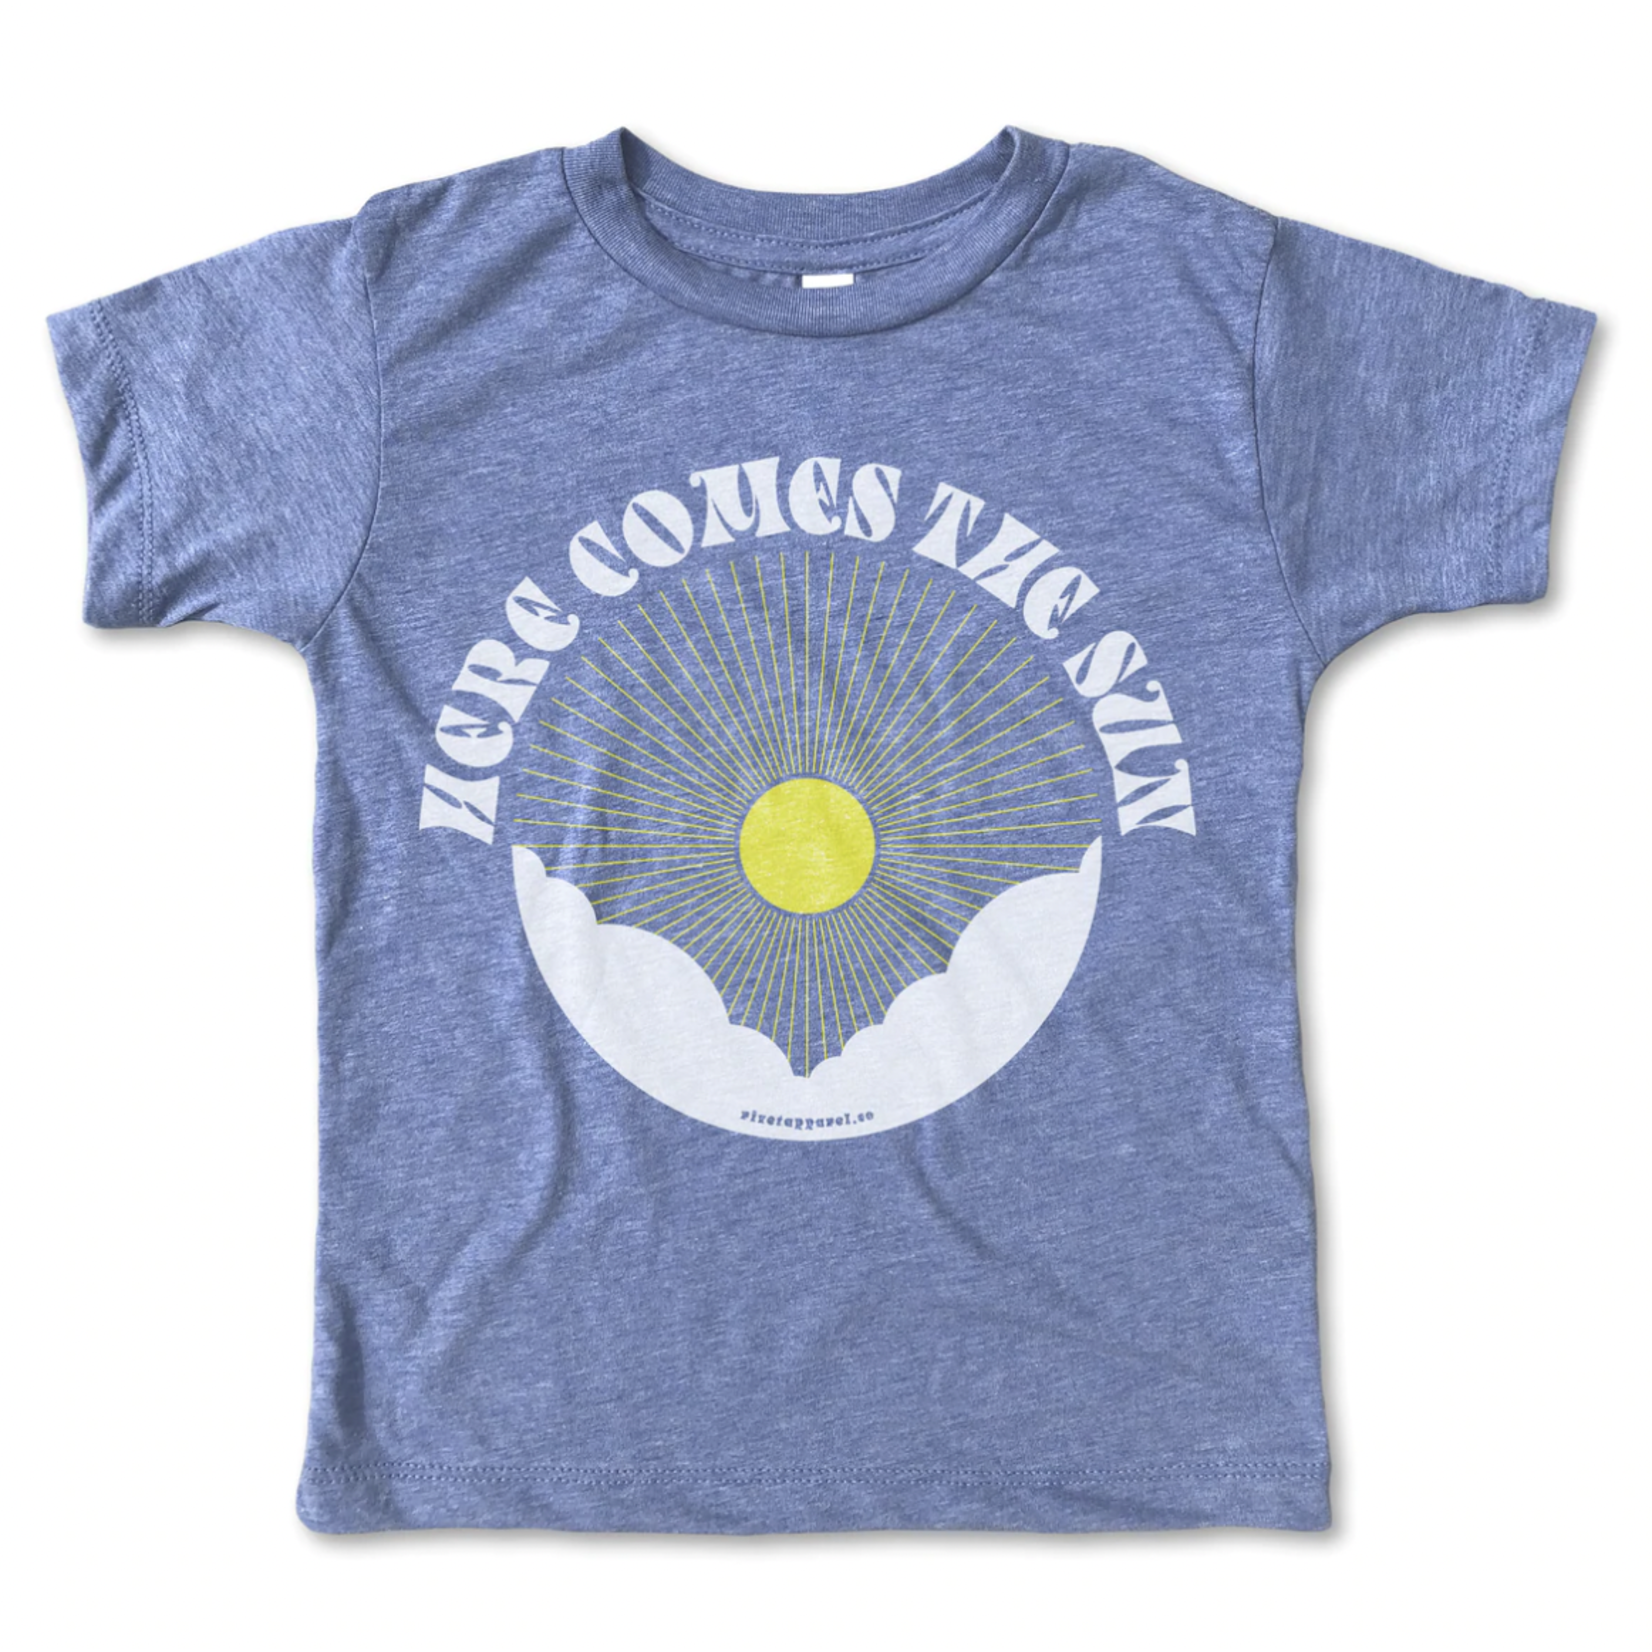 Rivet Apparel Co Here Comes the Sun Tee